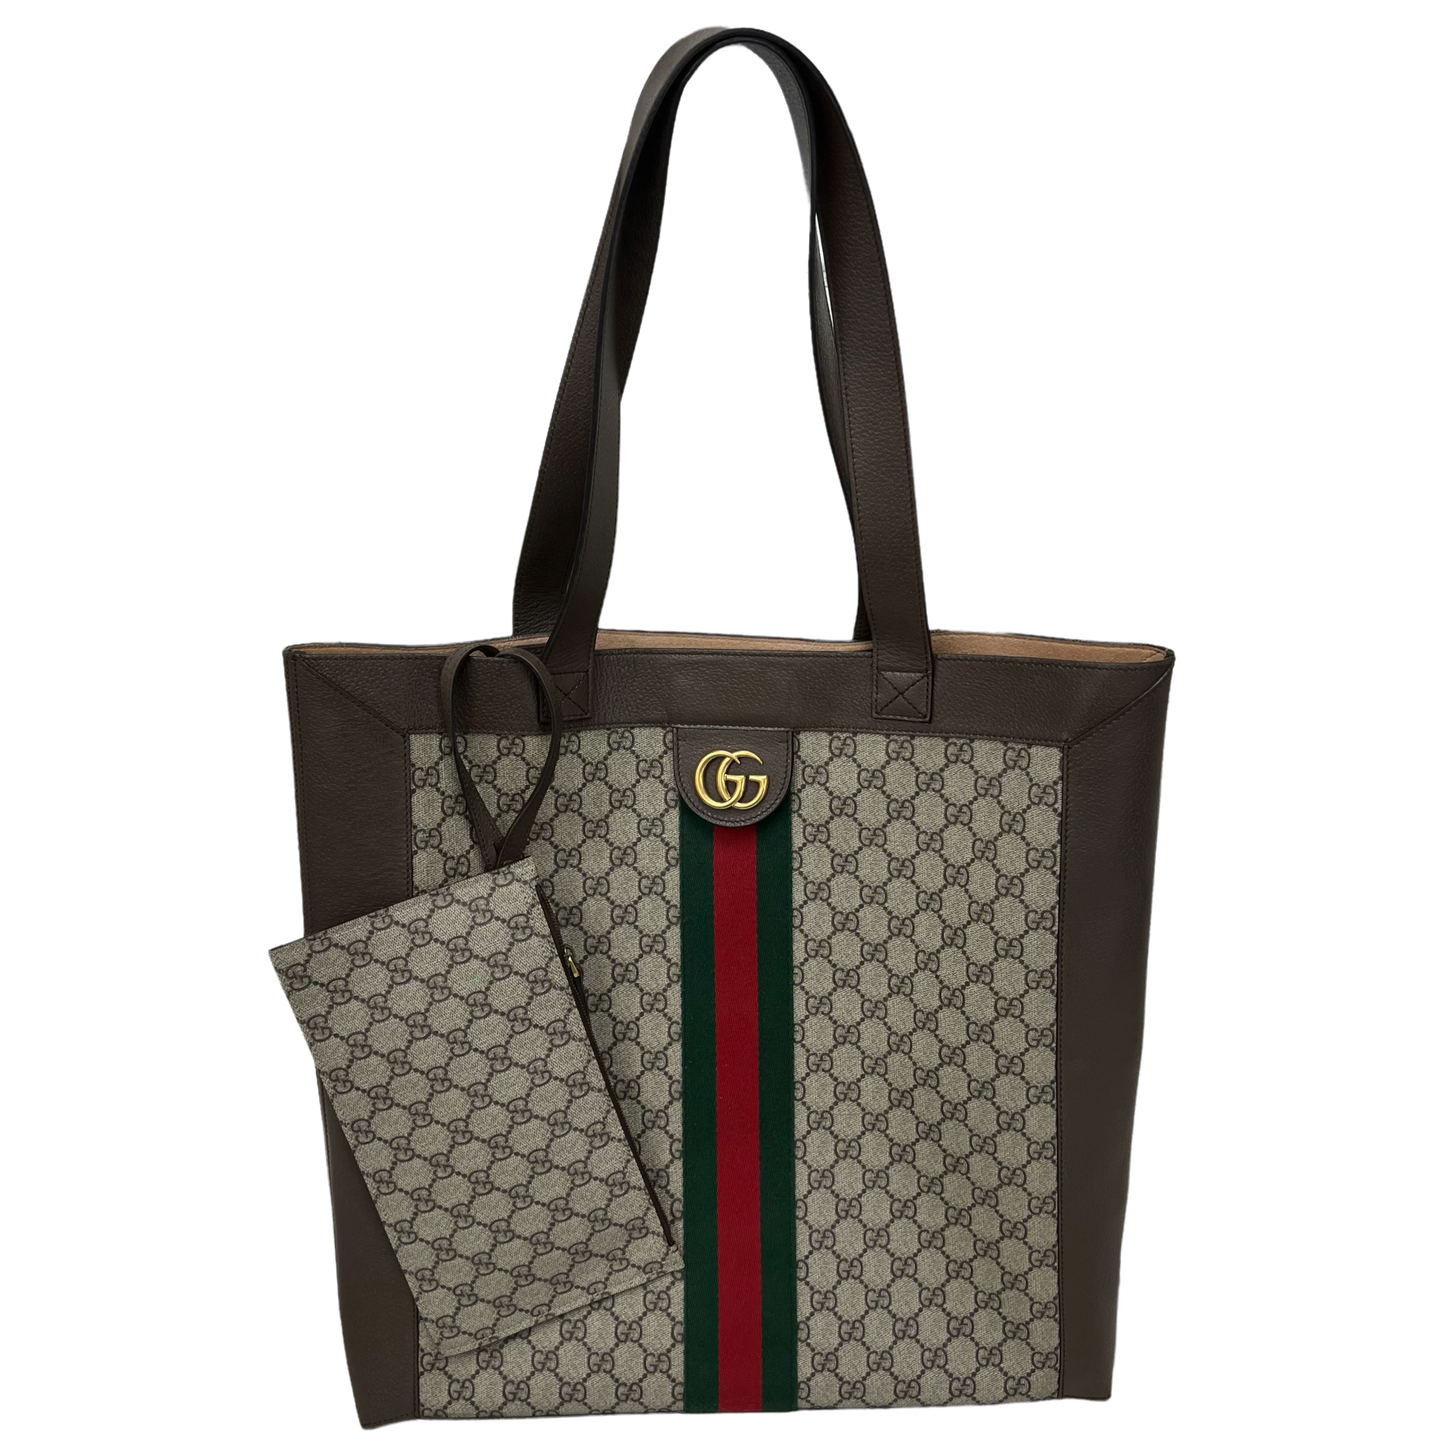 Gucci Ophidia Soft GG Supreme Large Tote Bag with Pouch